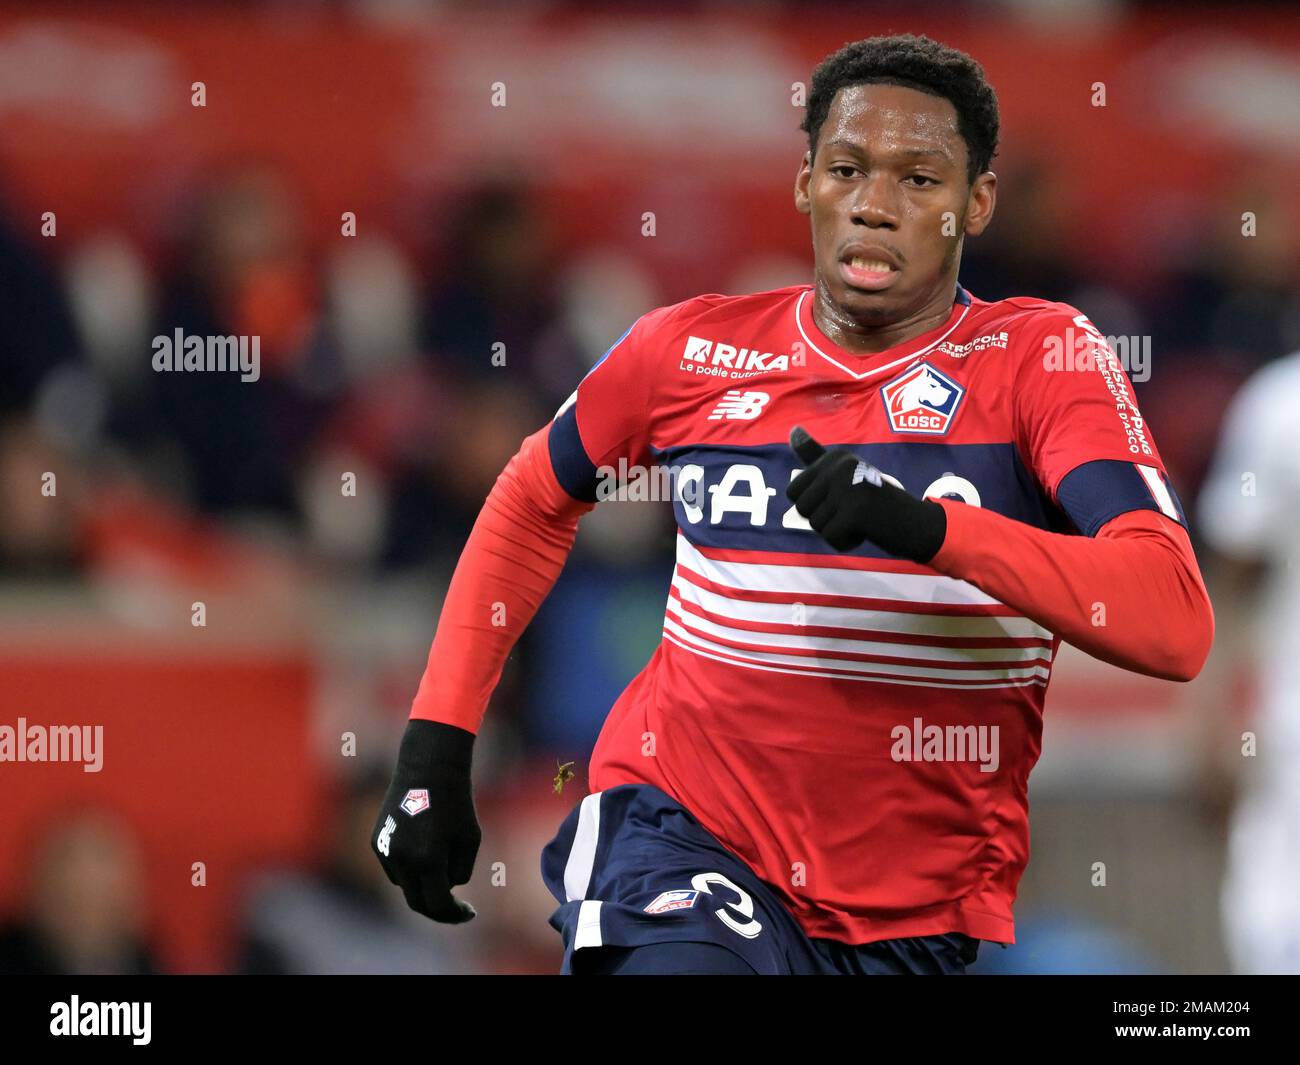 LILLE - Jonathan David of LOSC Lille during the French Ligue 1 match  between Lille OSC and Estac Troyes AC at Pierre-Mauroy Stadium on January  15, 2023 in Lille, France. AP